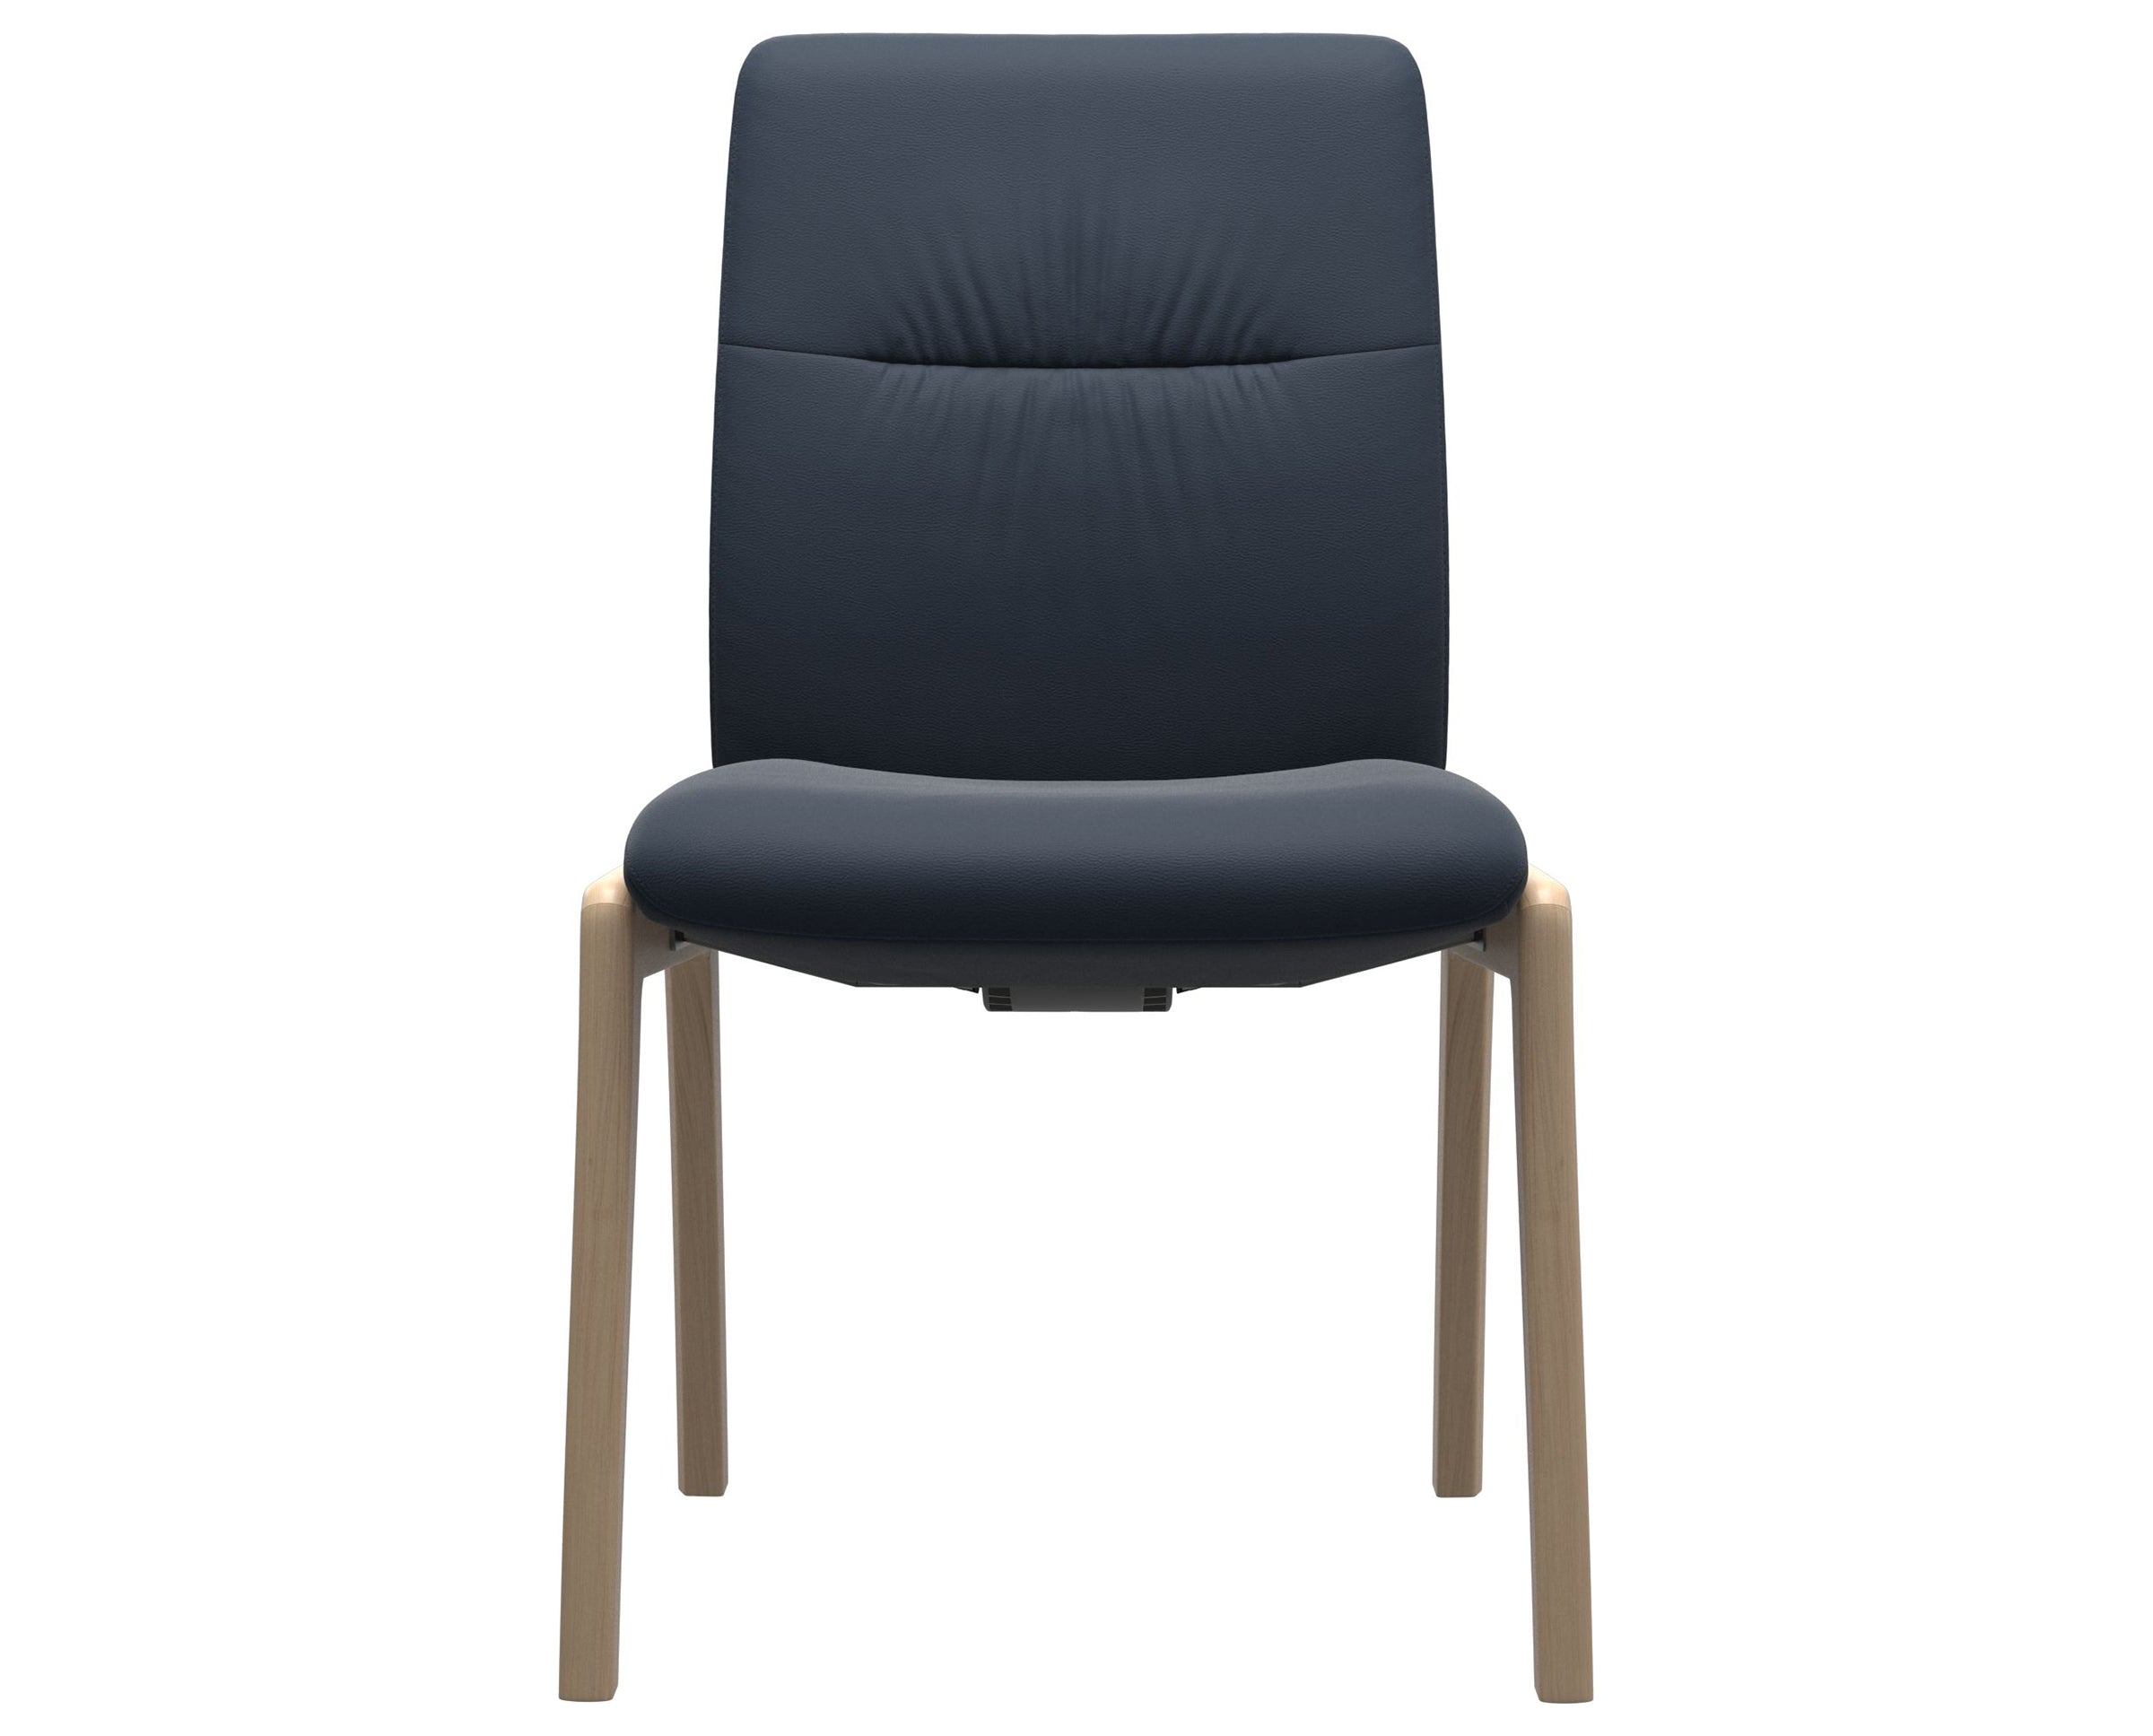 Paloma Leather Oxford Blue and Natural Base | Stressless Mint Low Back D100 Dining Chair | Valley Ridge Furniture